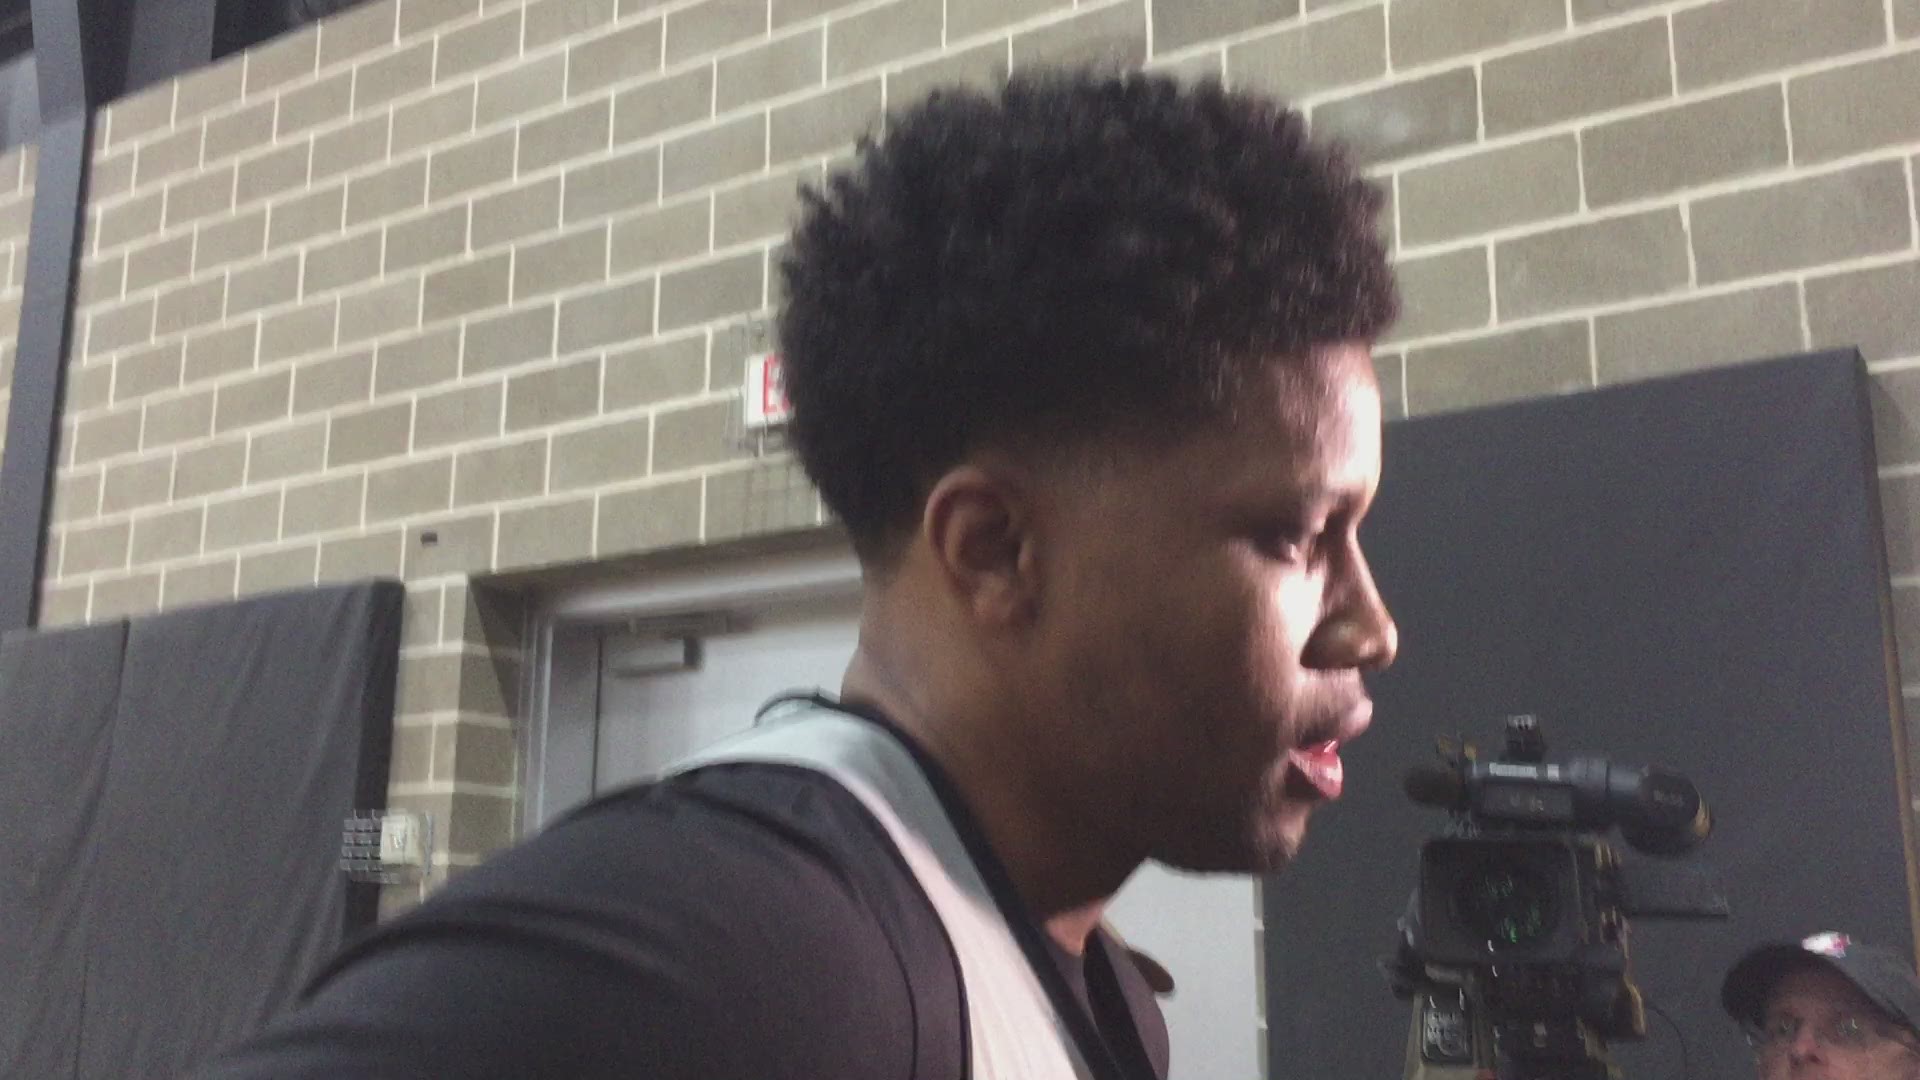 Spurs forward Rudy Gay on Game 3 against the Nuggets